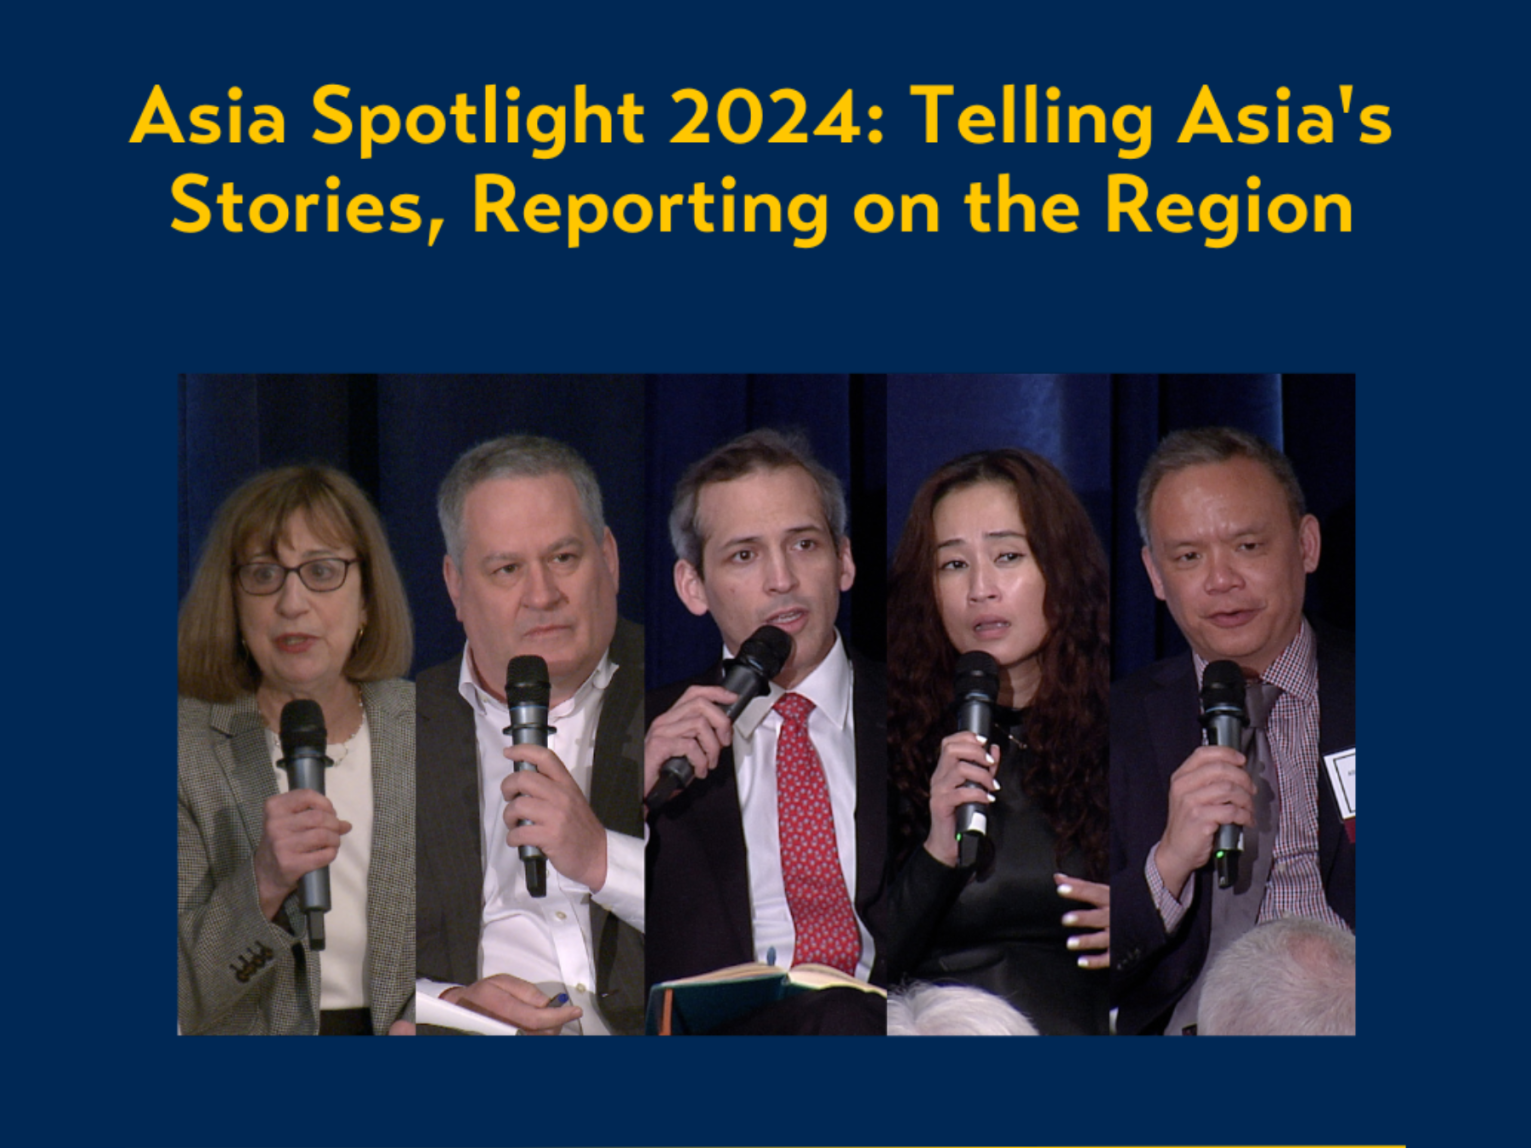  Asia Spotlight 2024: Telling Asia's Stories, Reporting on the Region 